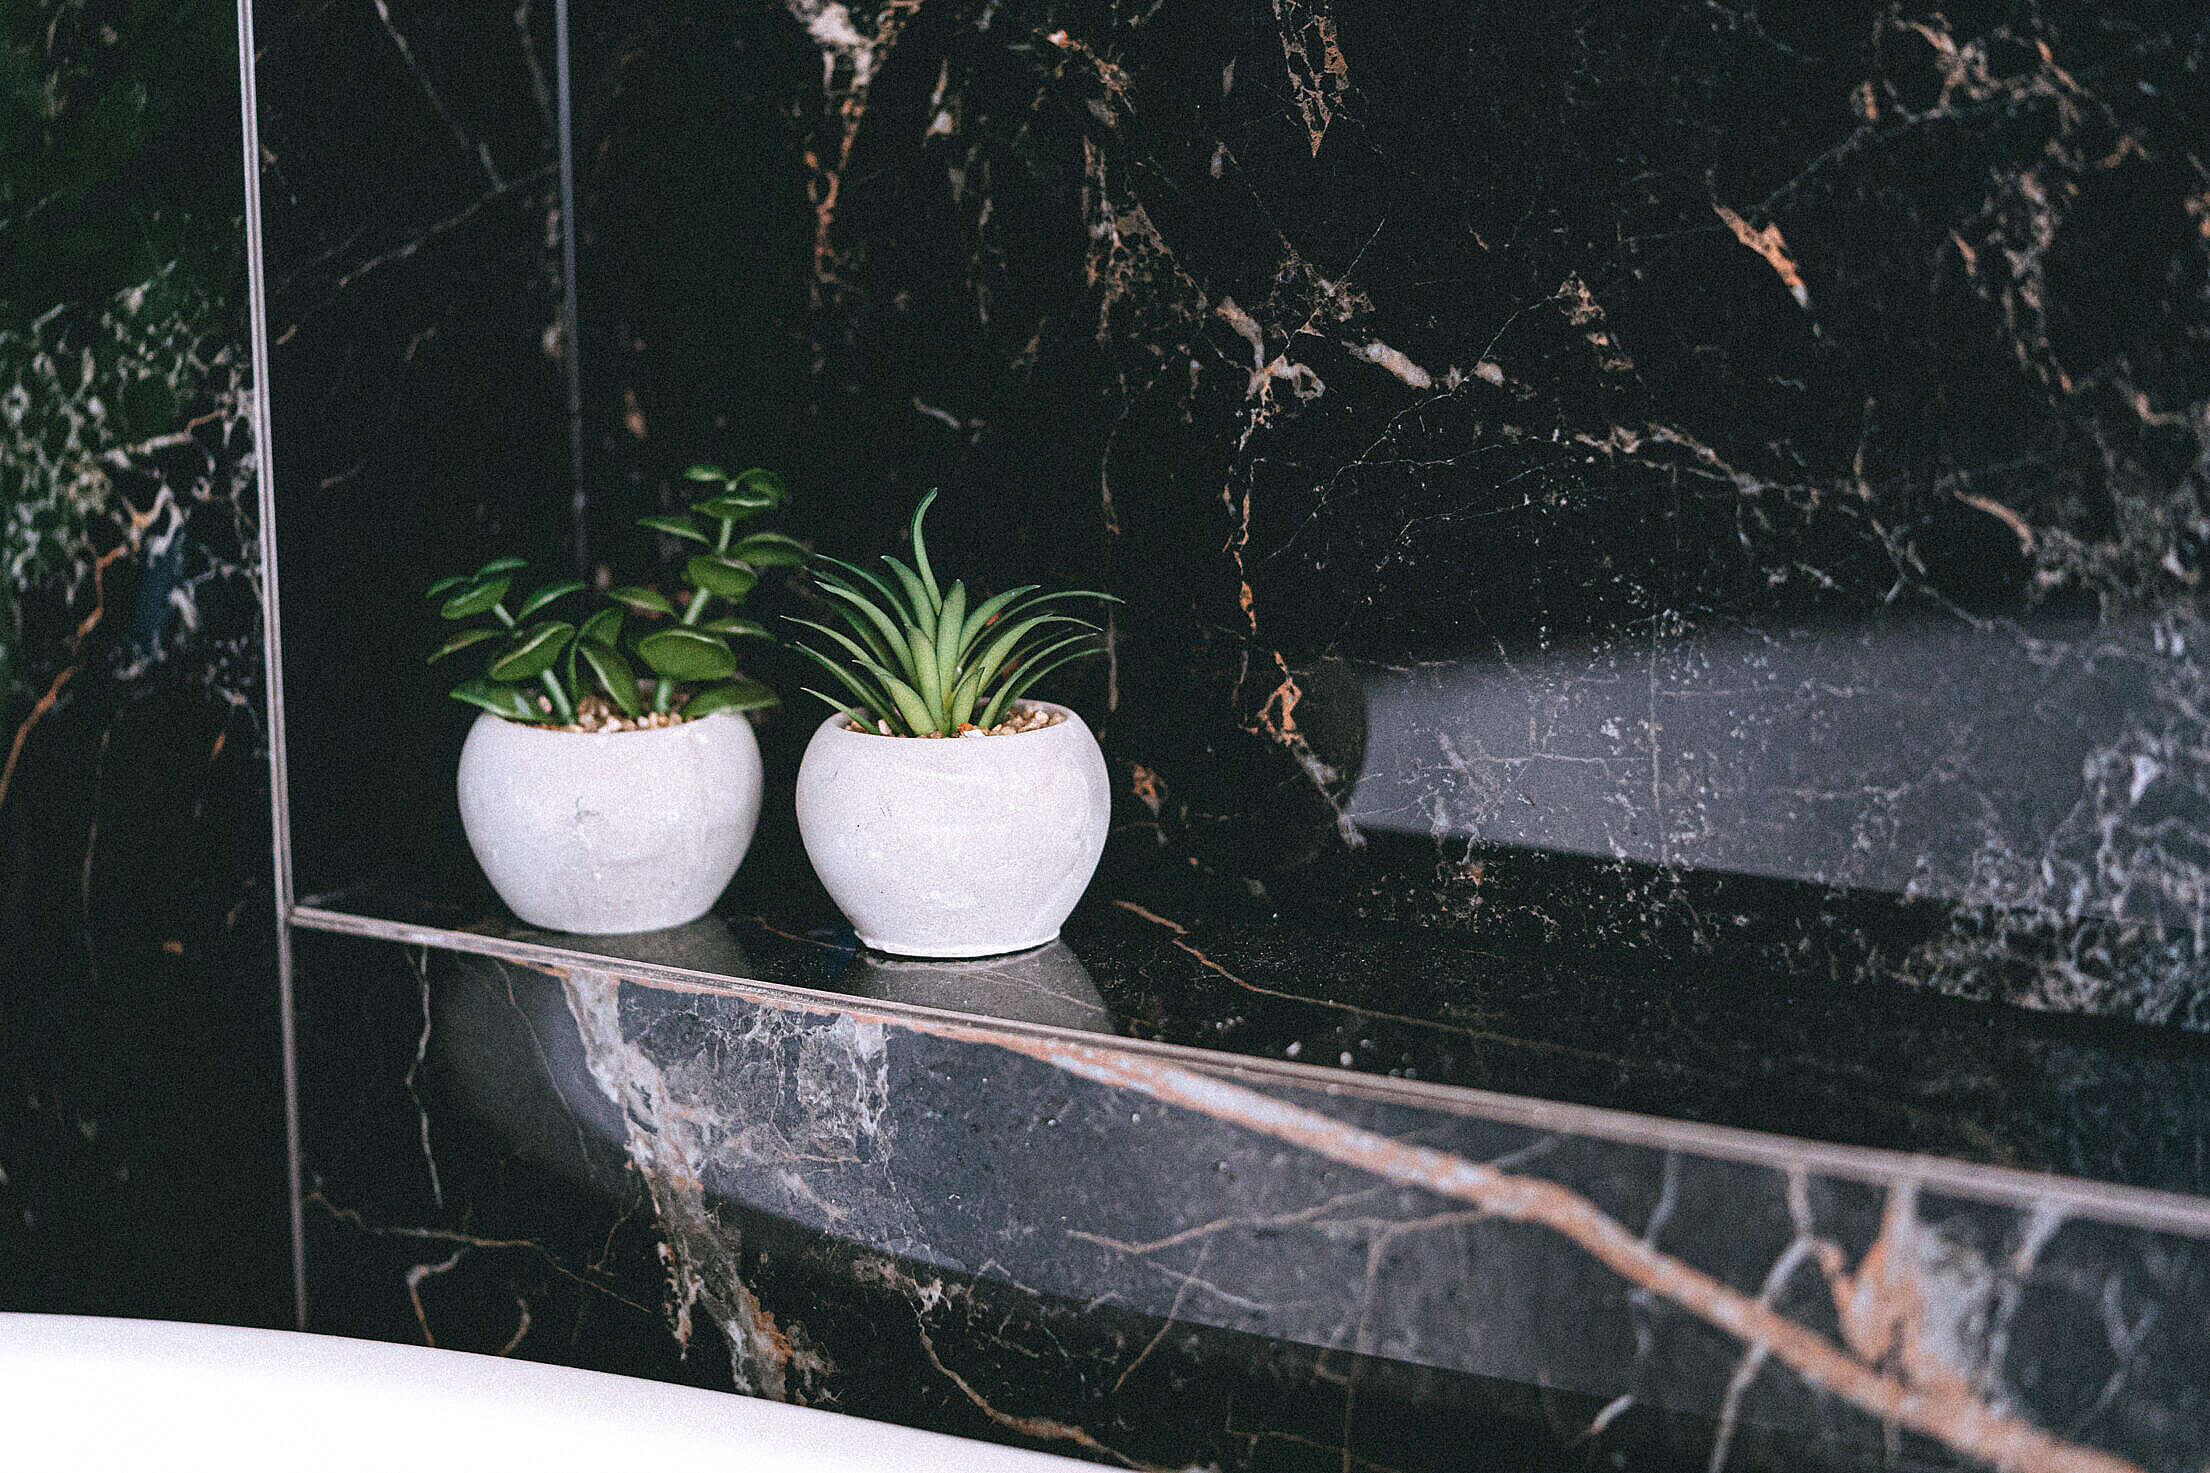 Small Concrete Flower Pots Decorations in Black Marble Bathroom Free Stock Photo